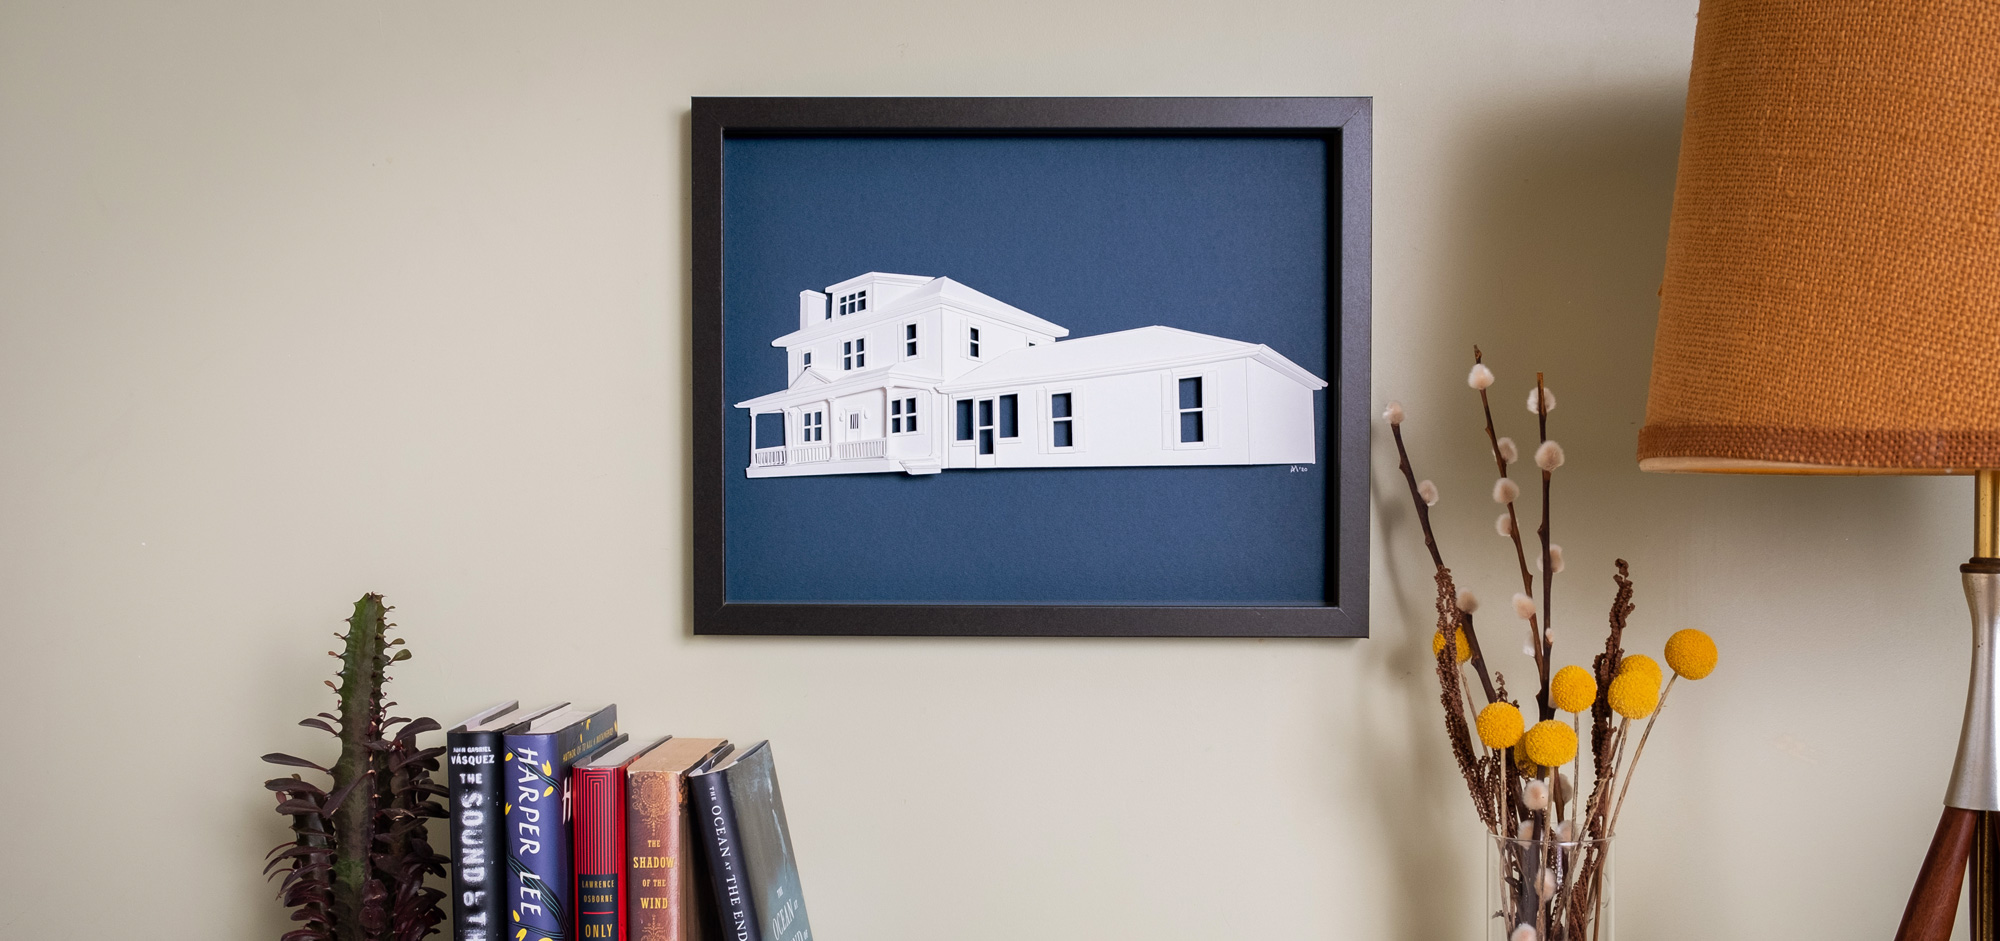 Framed house portrait hanging on a living room wall